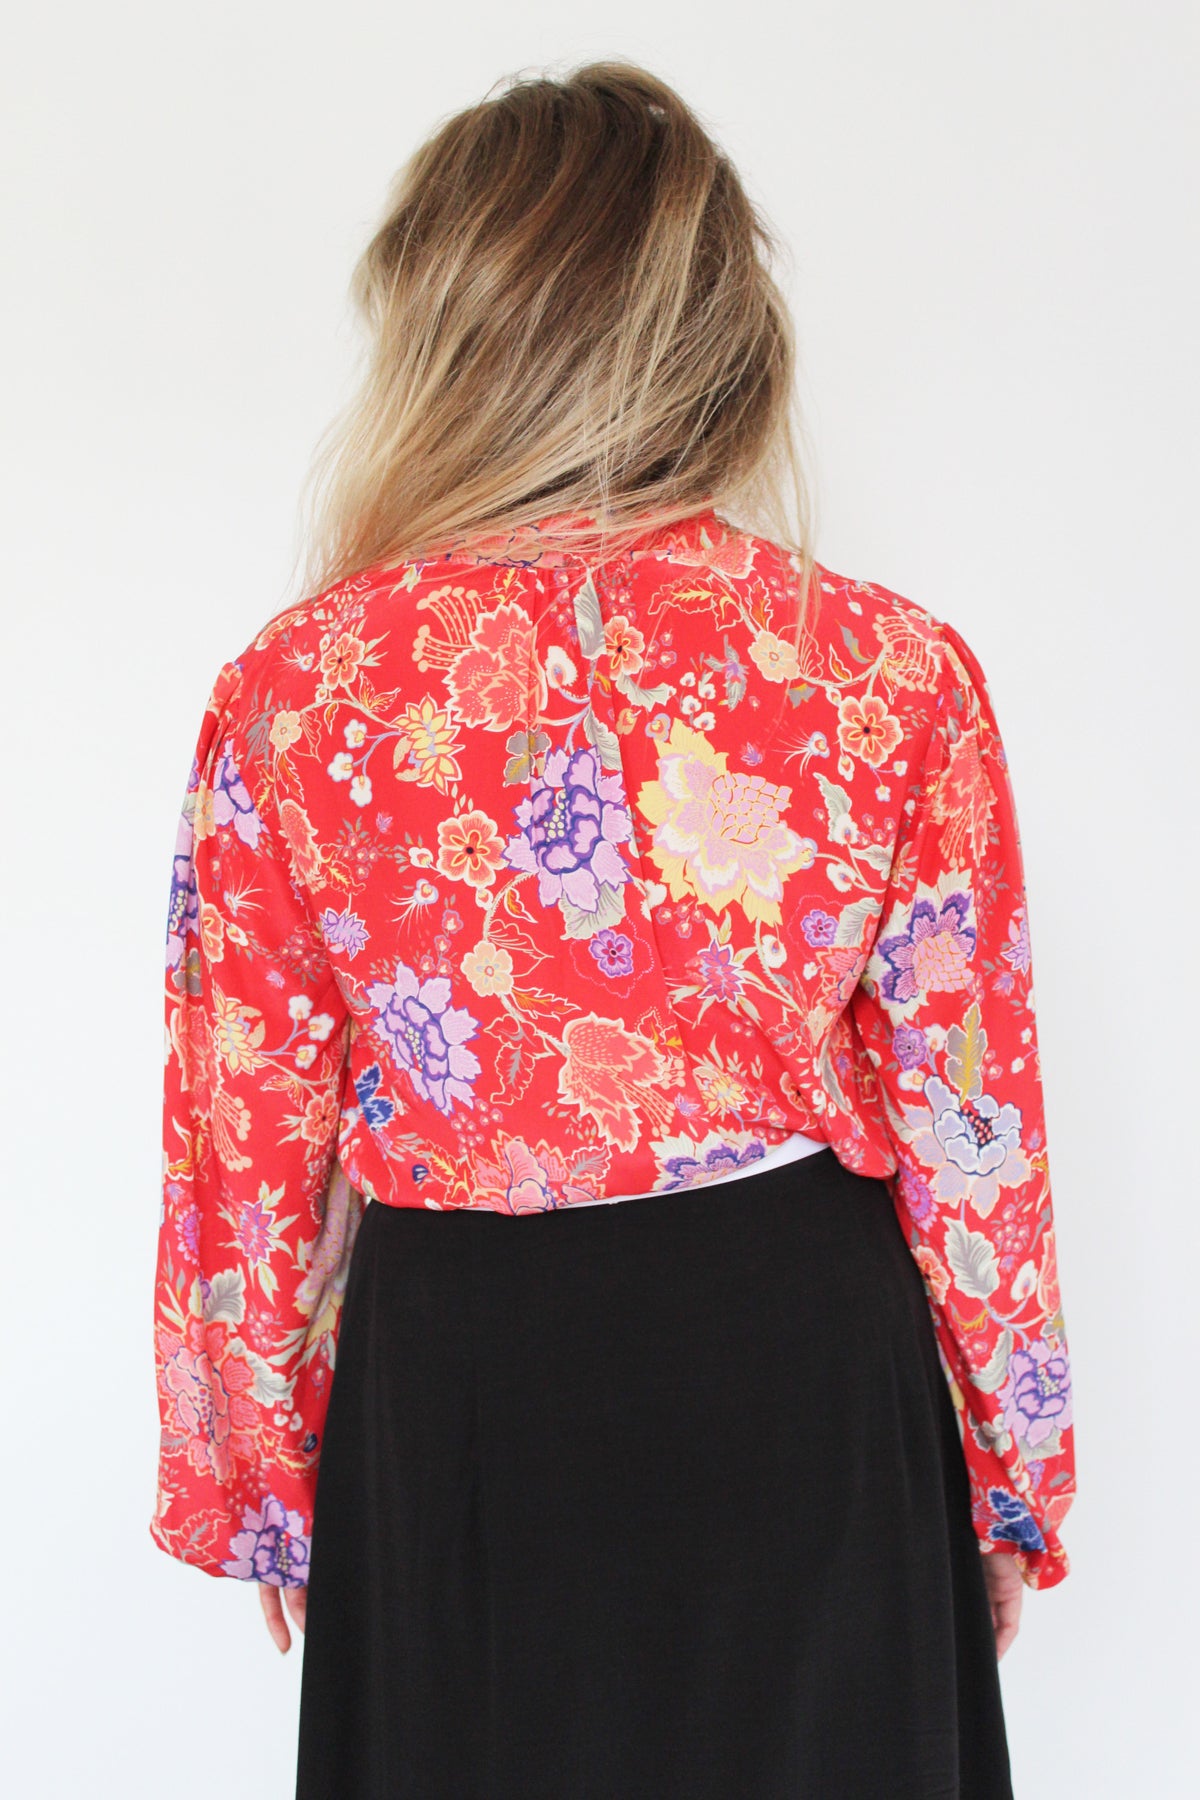 RIXO Moss Blouse in Peony Flora Red